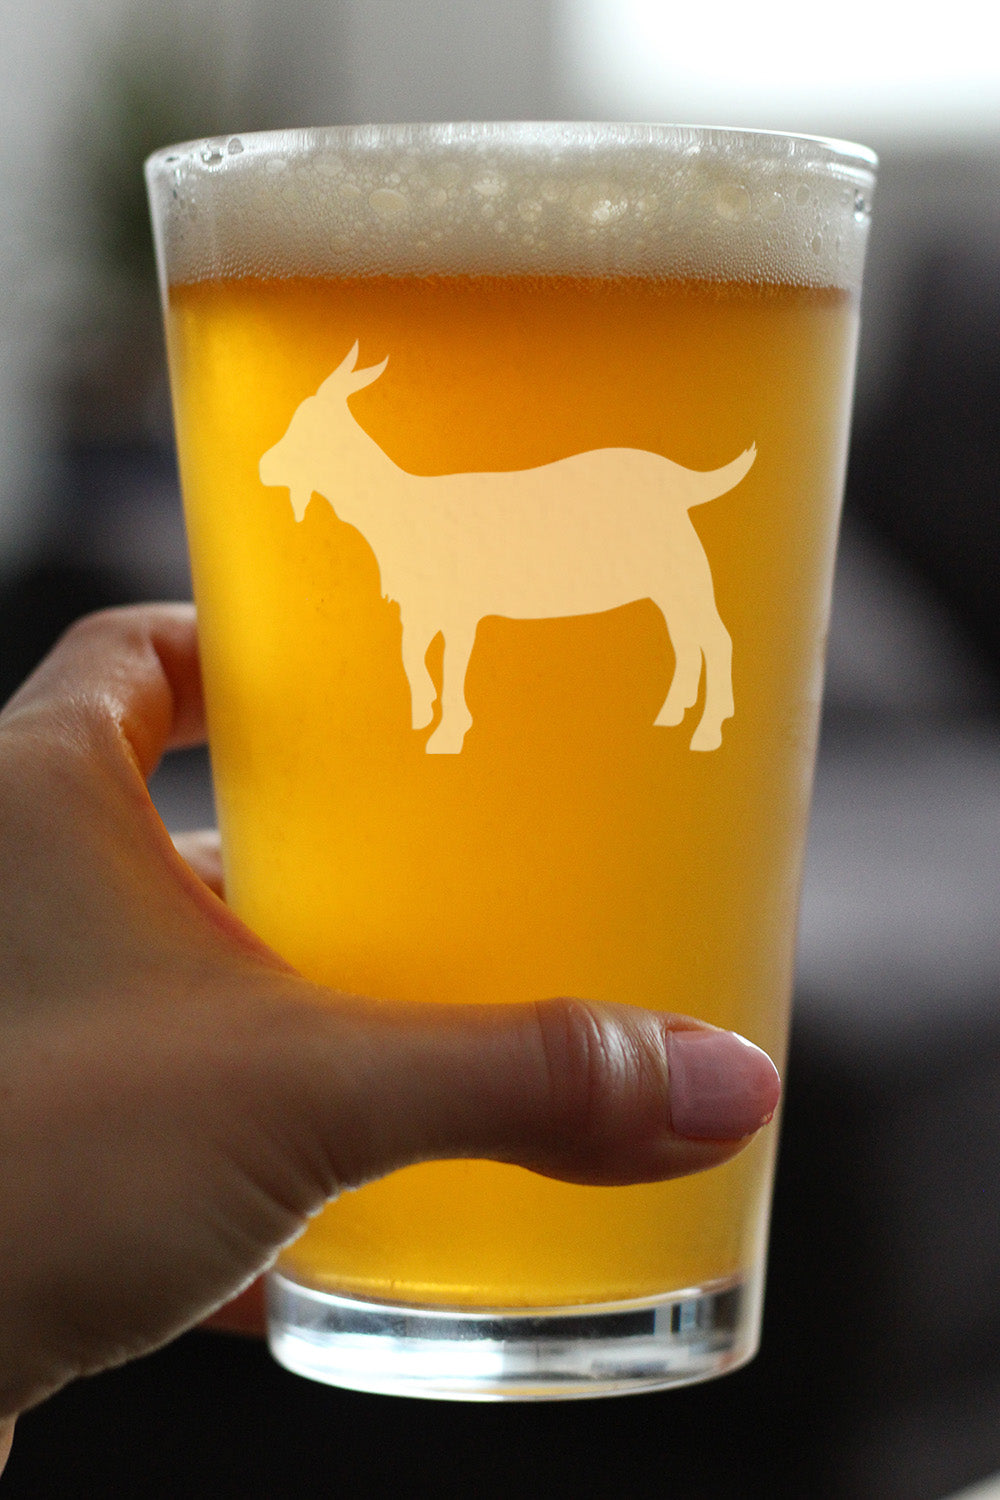 Goat Pint Glass for Beer - Funny Unique Farm Animal Themed Decor and Gifts for Goat Lovers - 16 oz